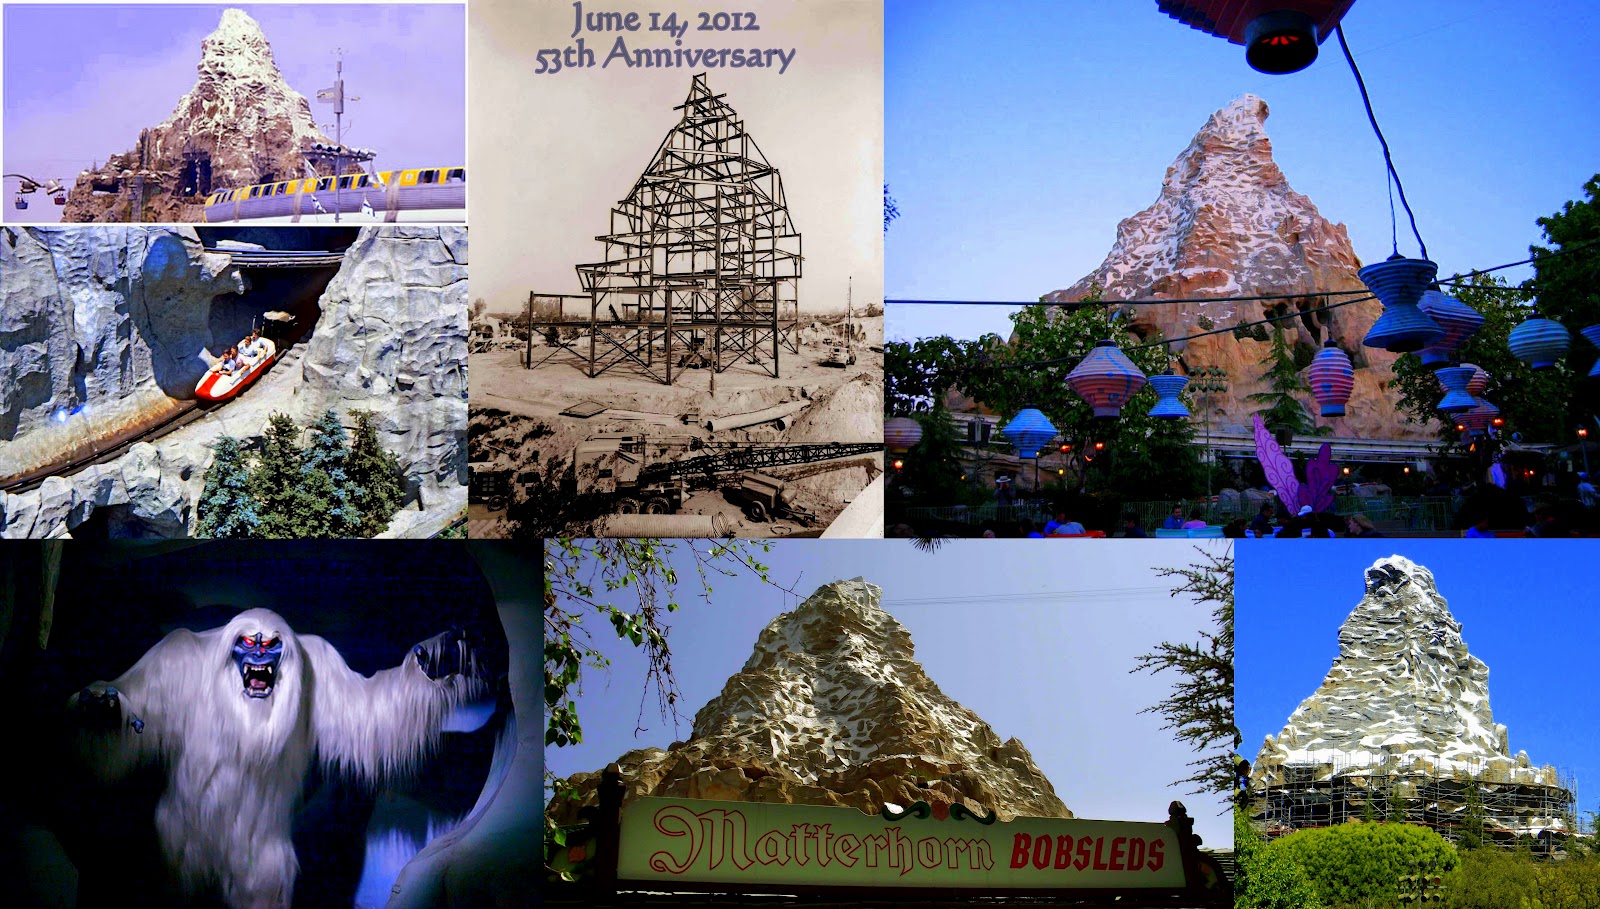 The Walt Disney World Picture of the Day Matterhorn Bobsleds at